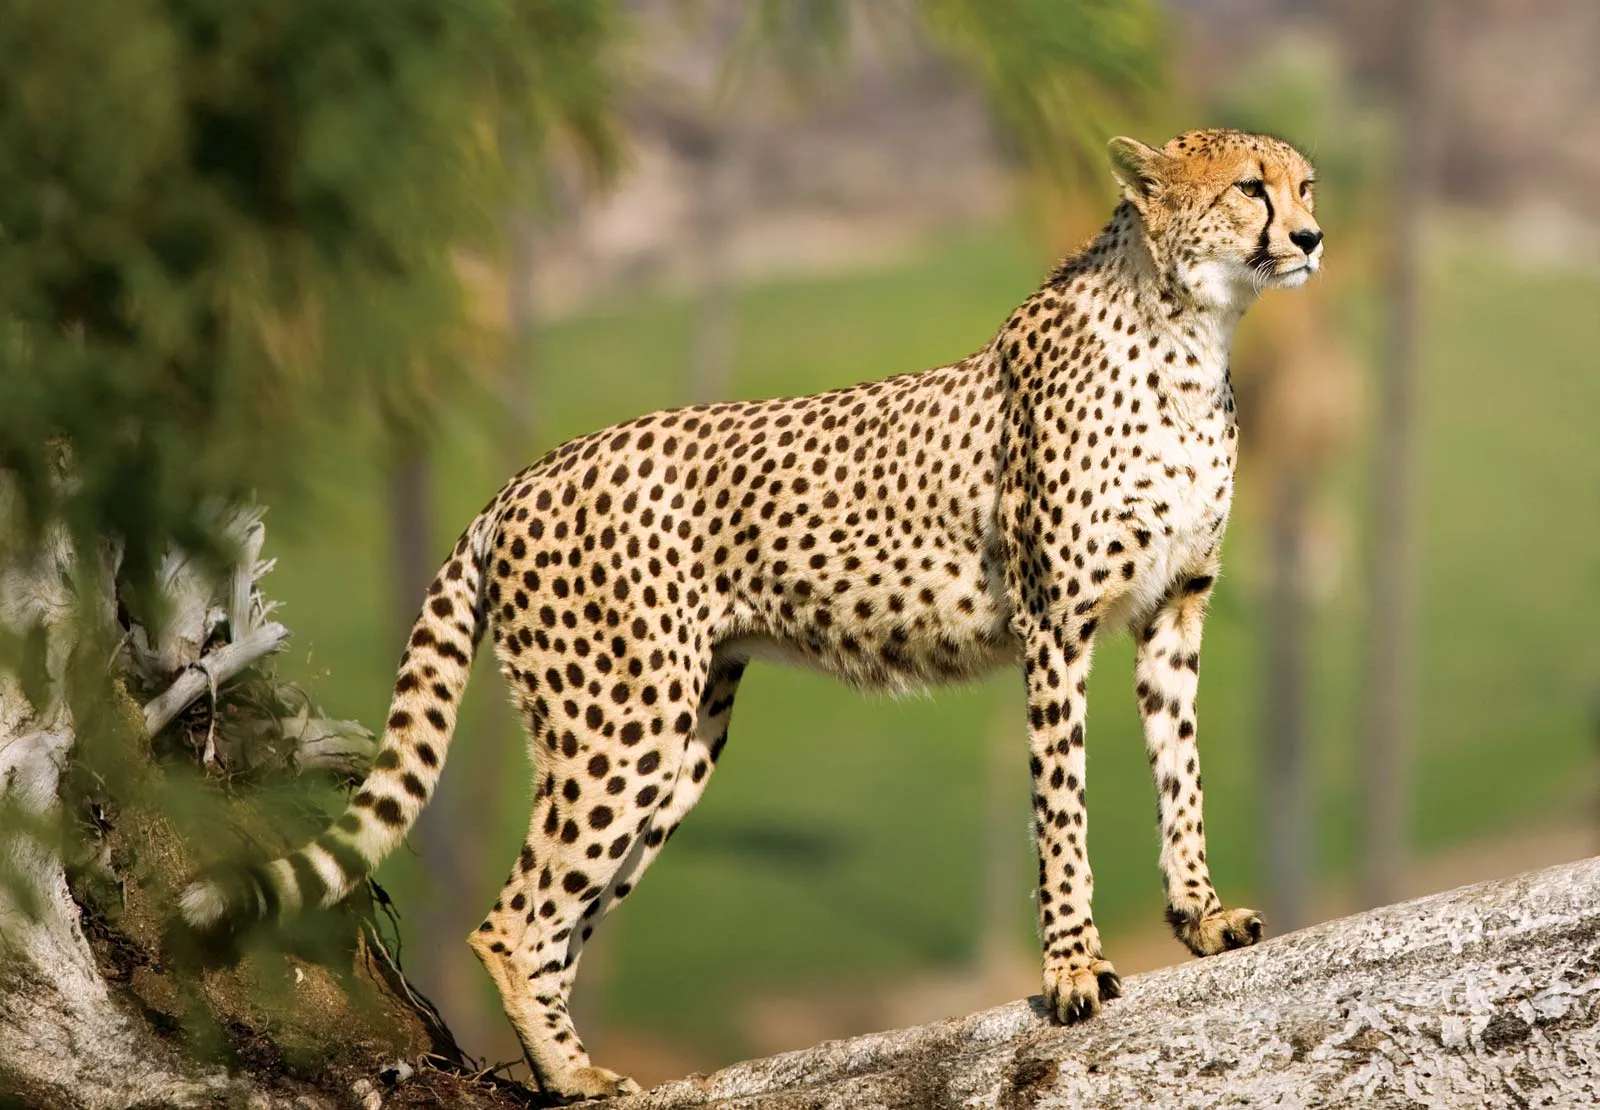 The Cheetah online puzzle